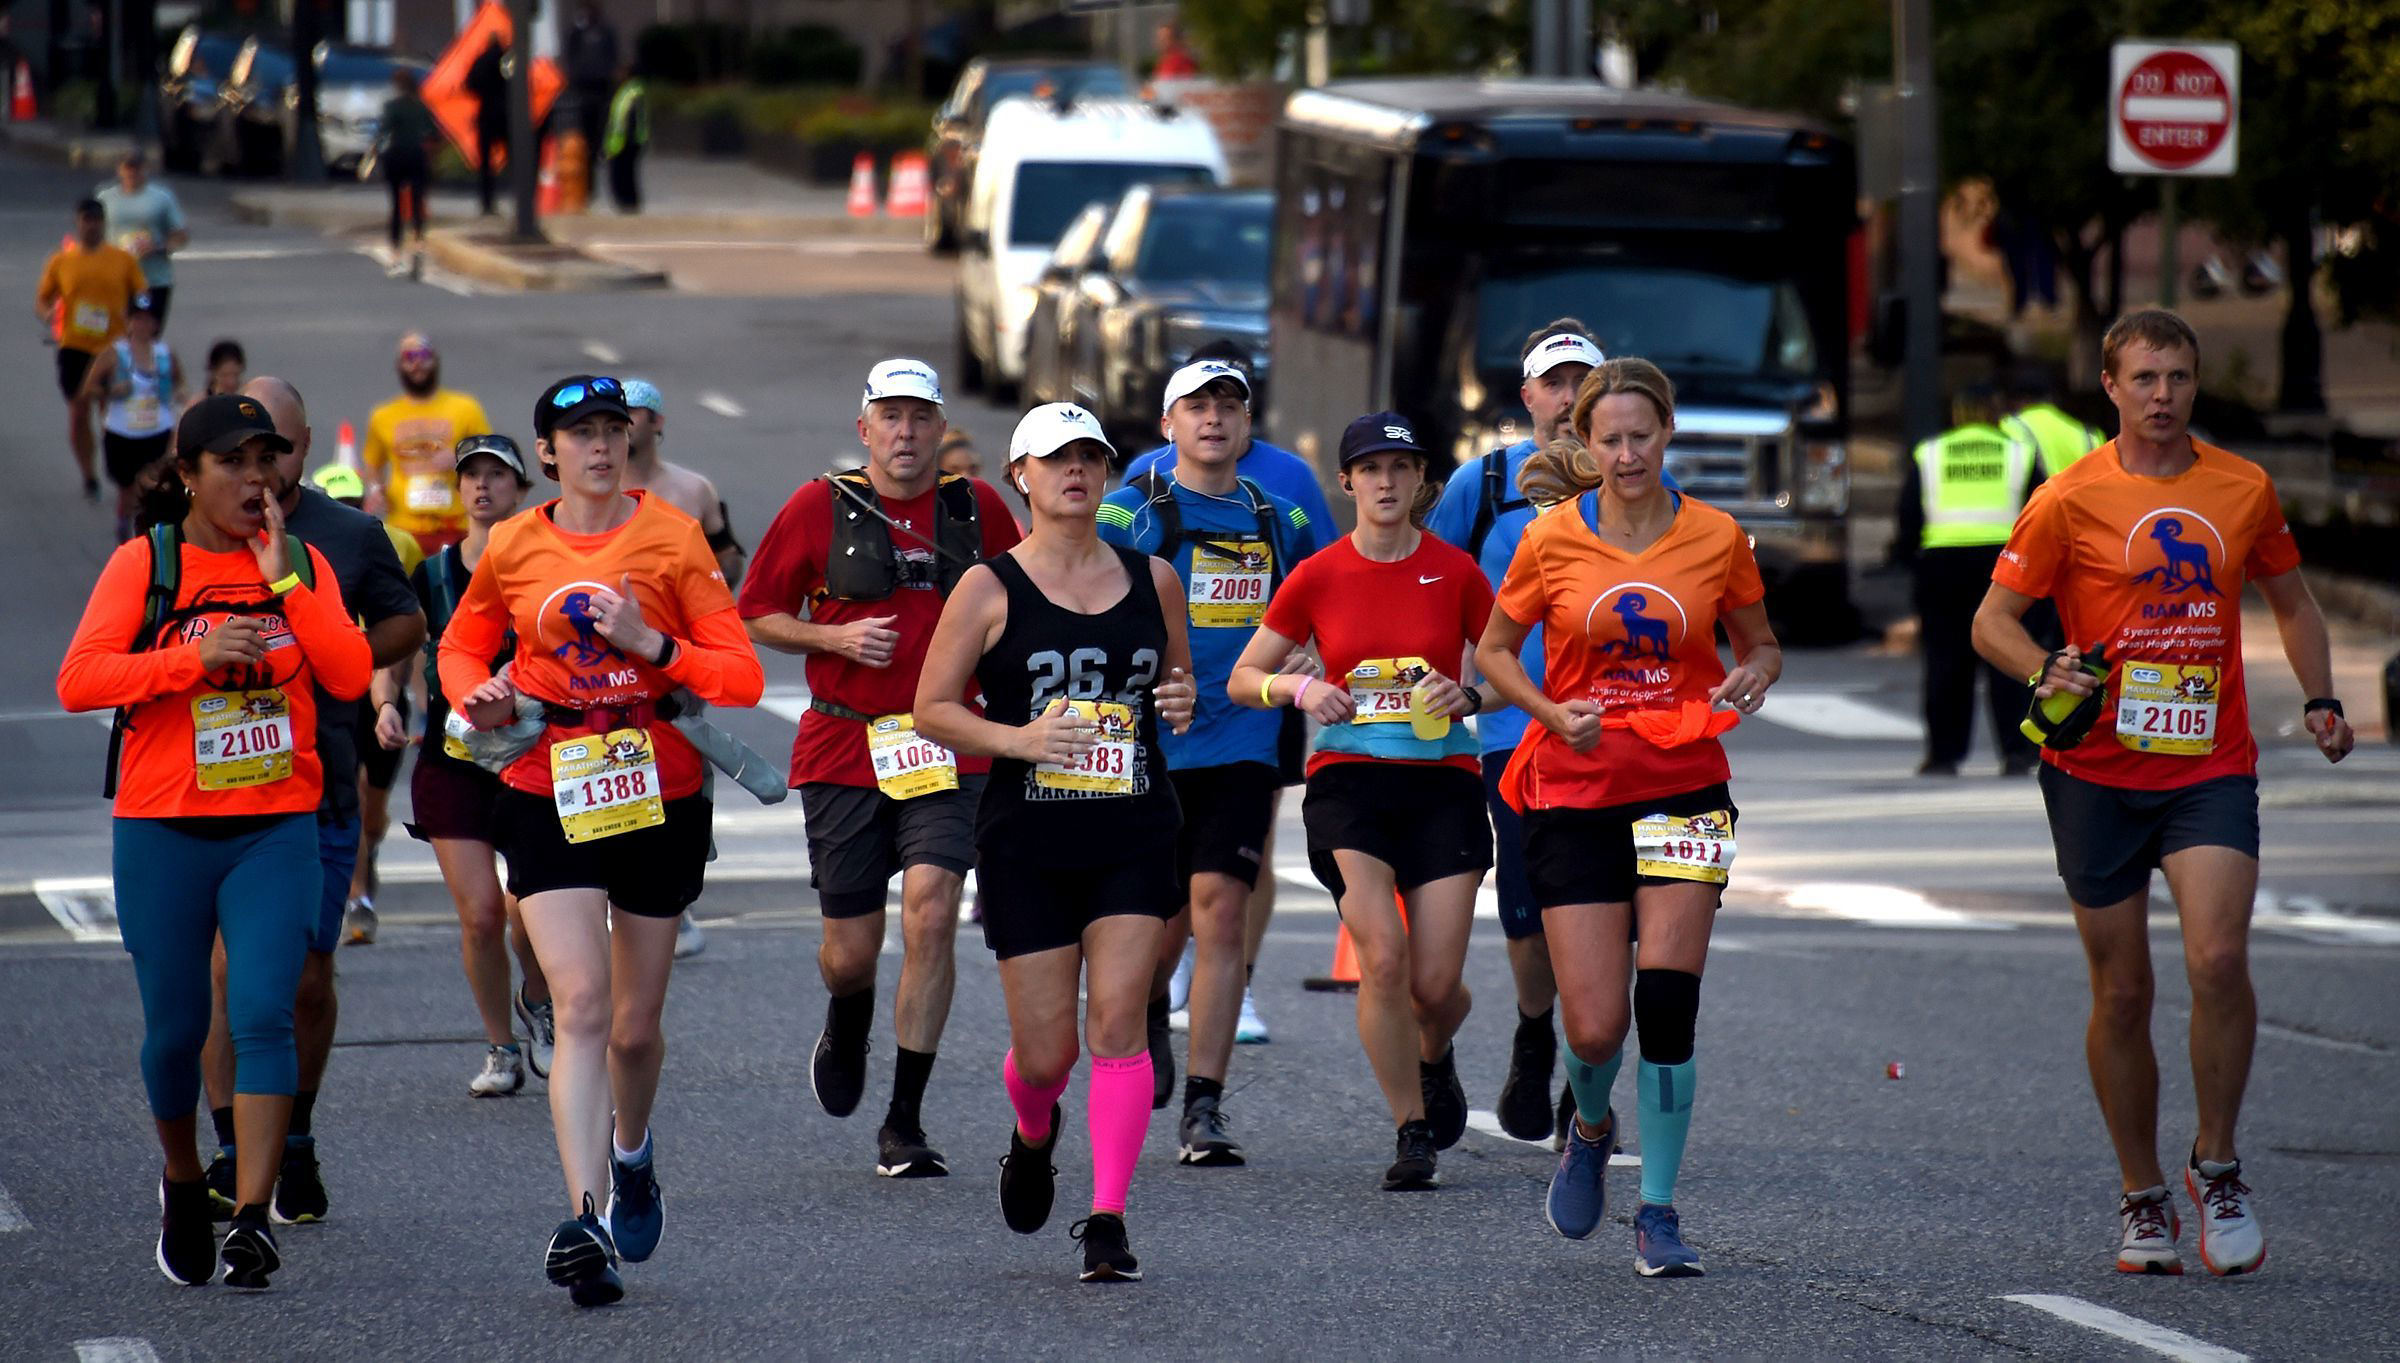 Baltimore Running Festival What to know about parking, road closures